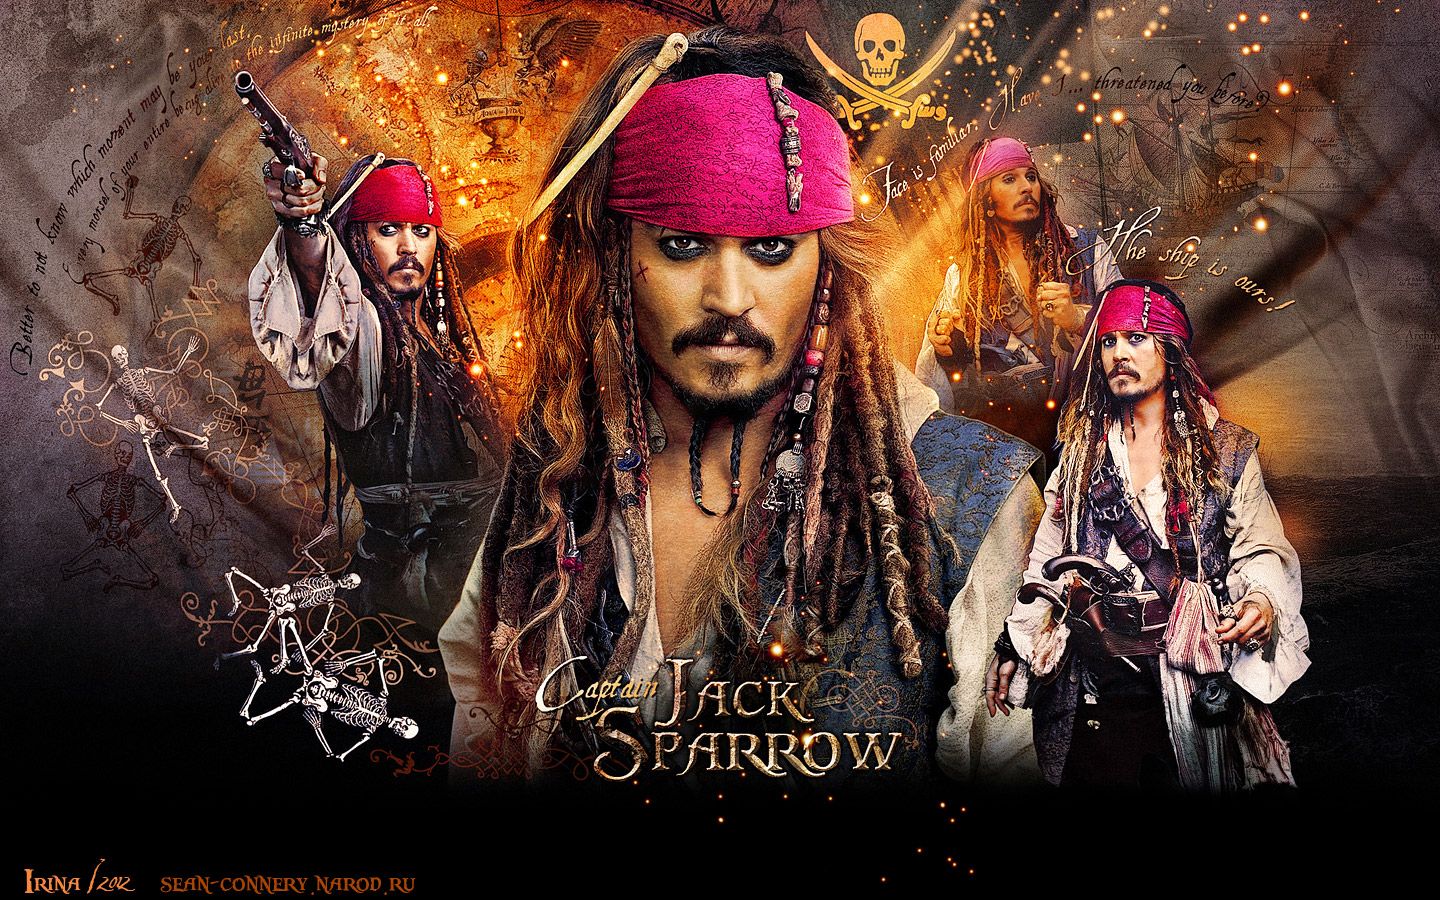 POTC wallpapers - Pirates of the Caribbean Wallpaper (32851122 ...